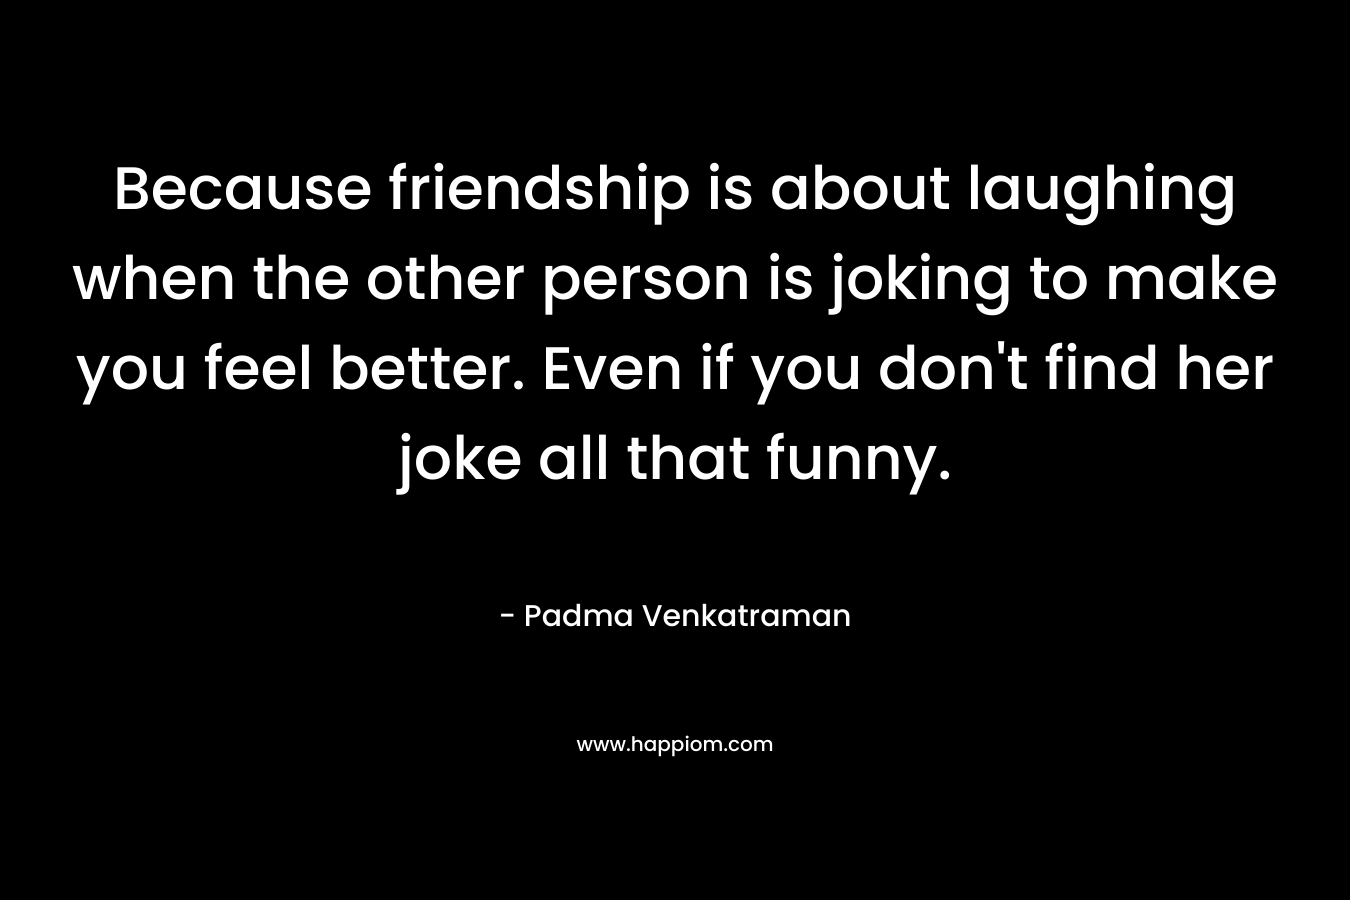 Because friendship is about laughing when the other person is joking to make you feel better. Even if you don’t find her joke all that funny. – Padma Venkatraman